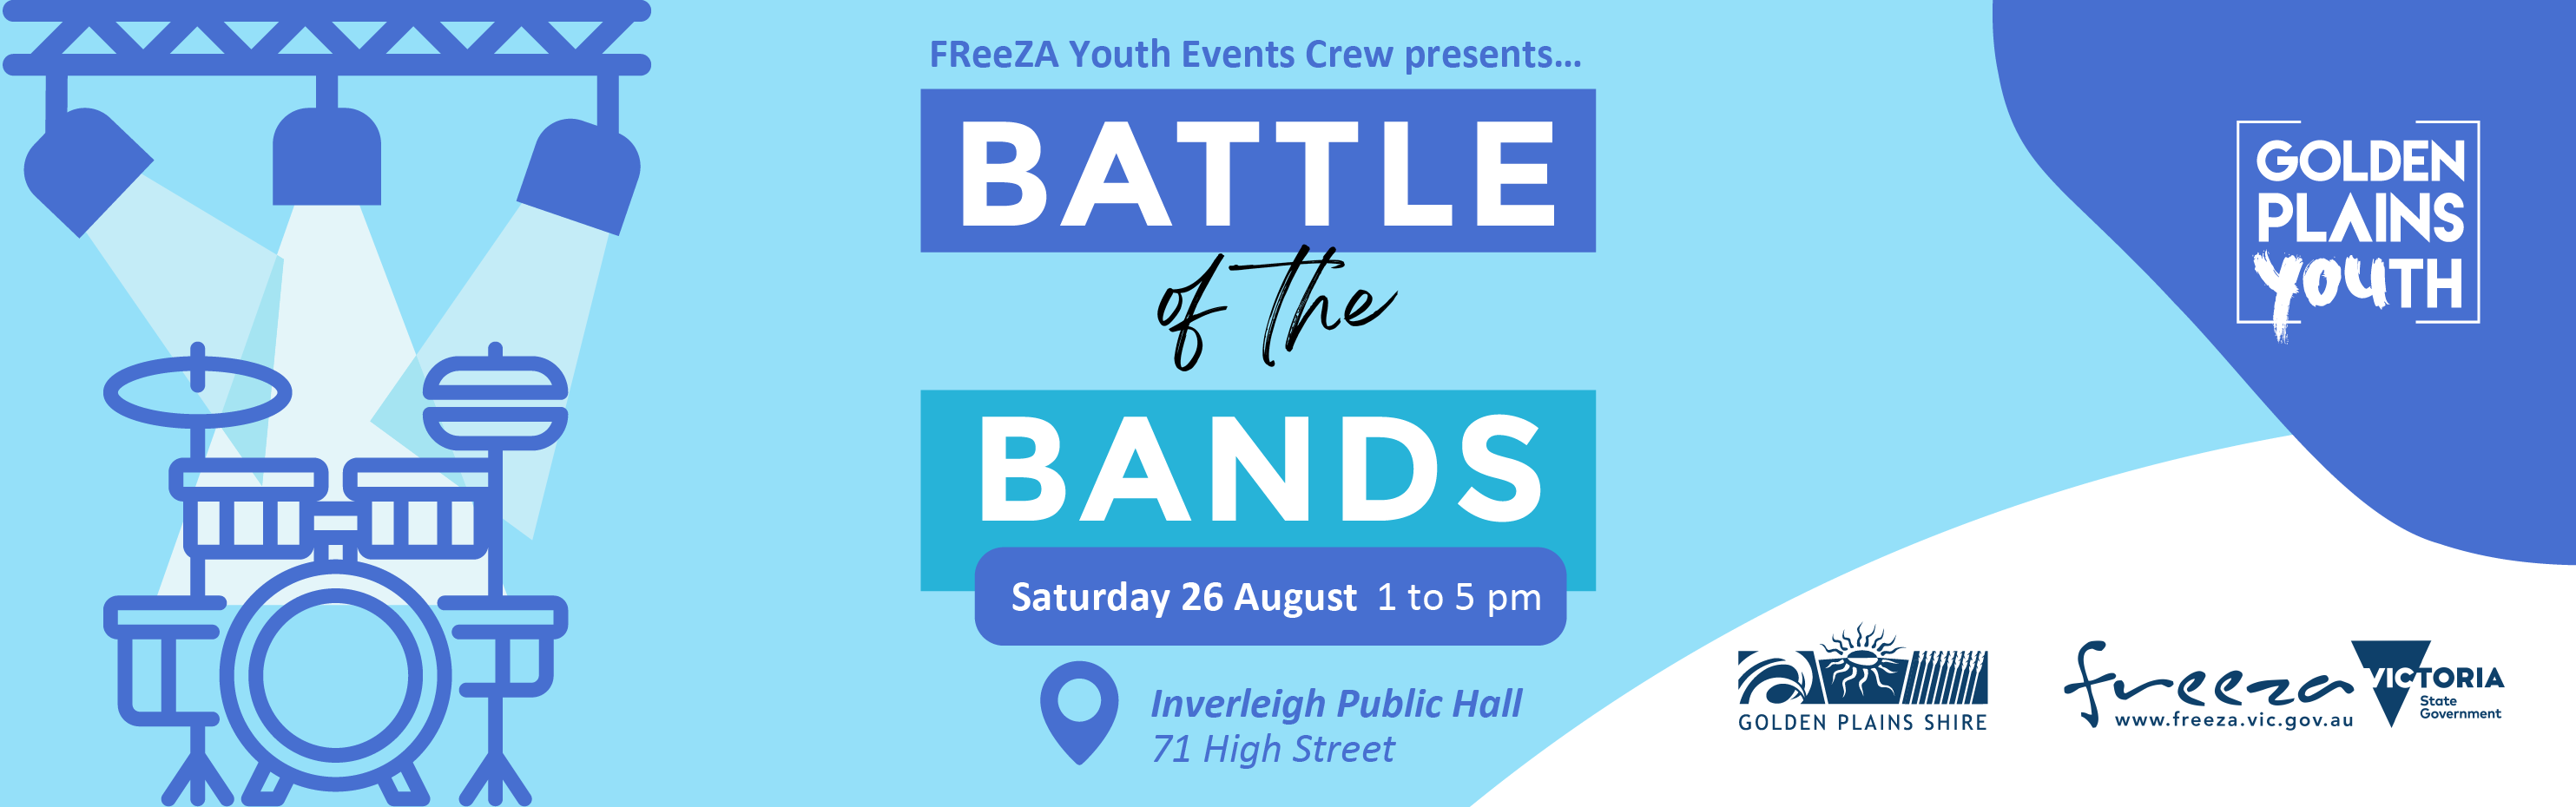 Battle of the Bands banner